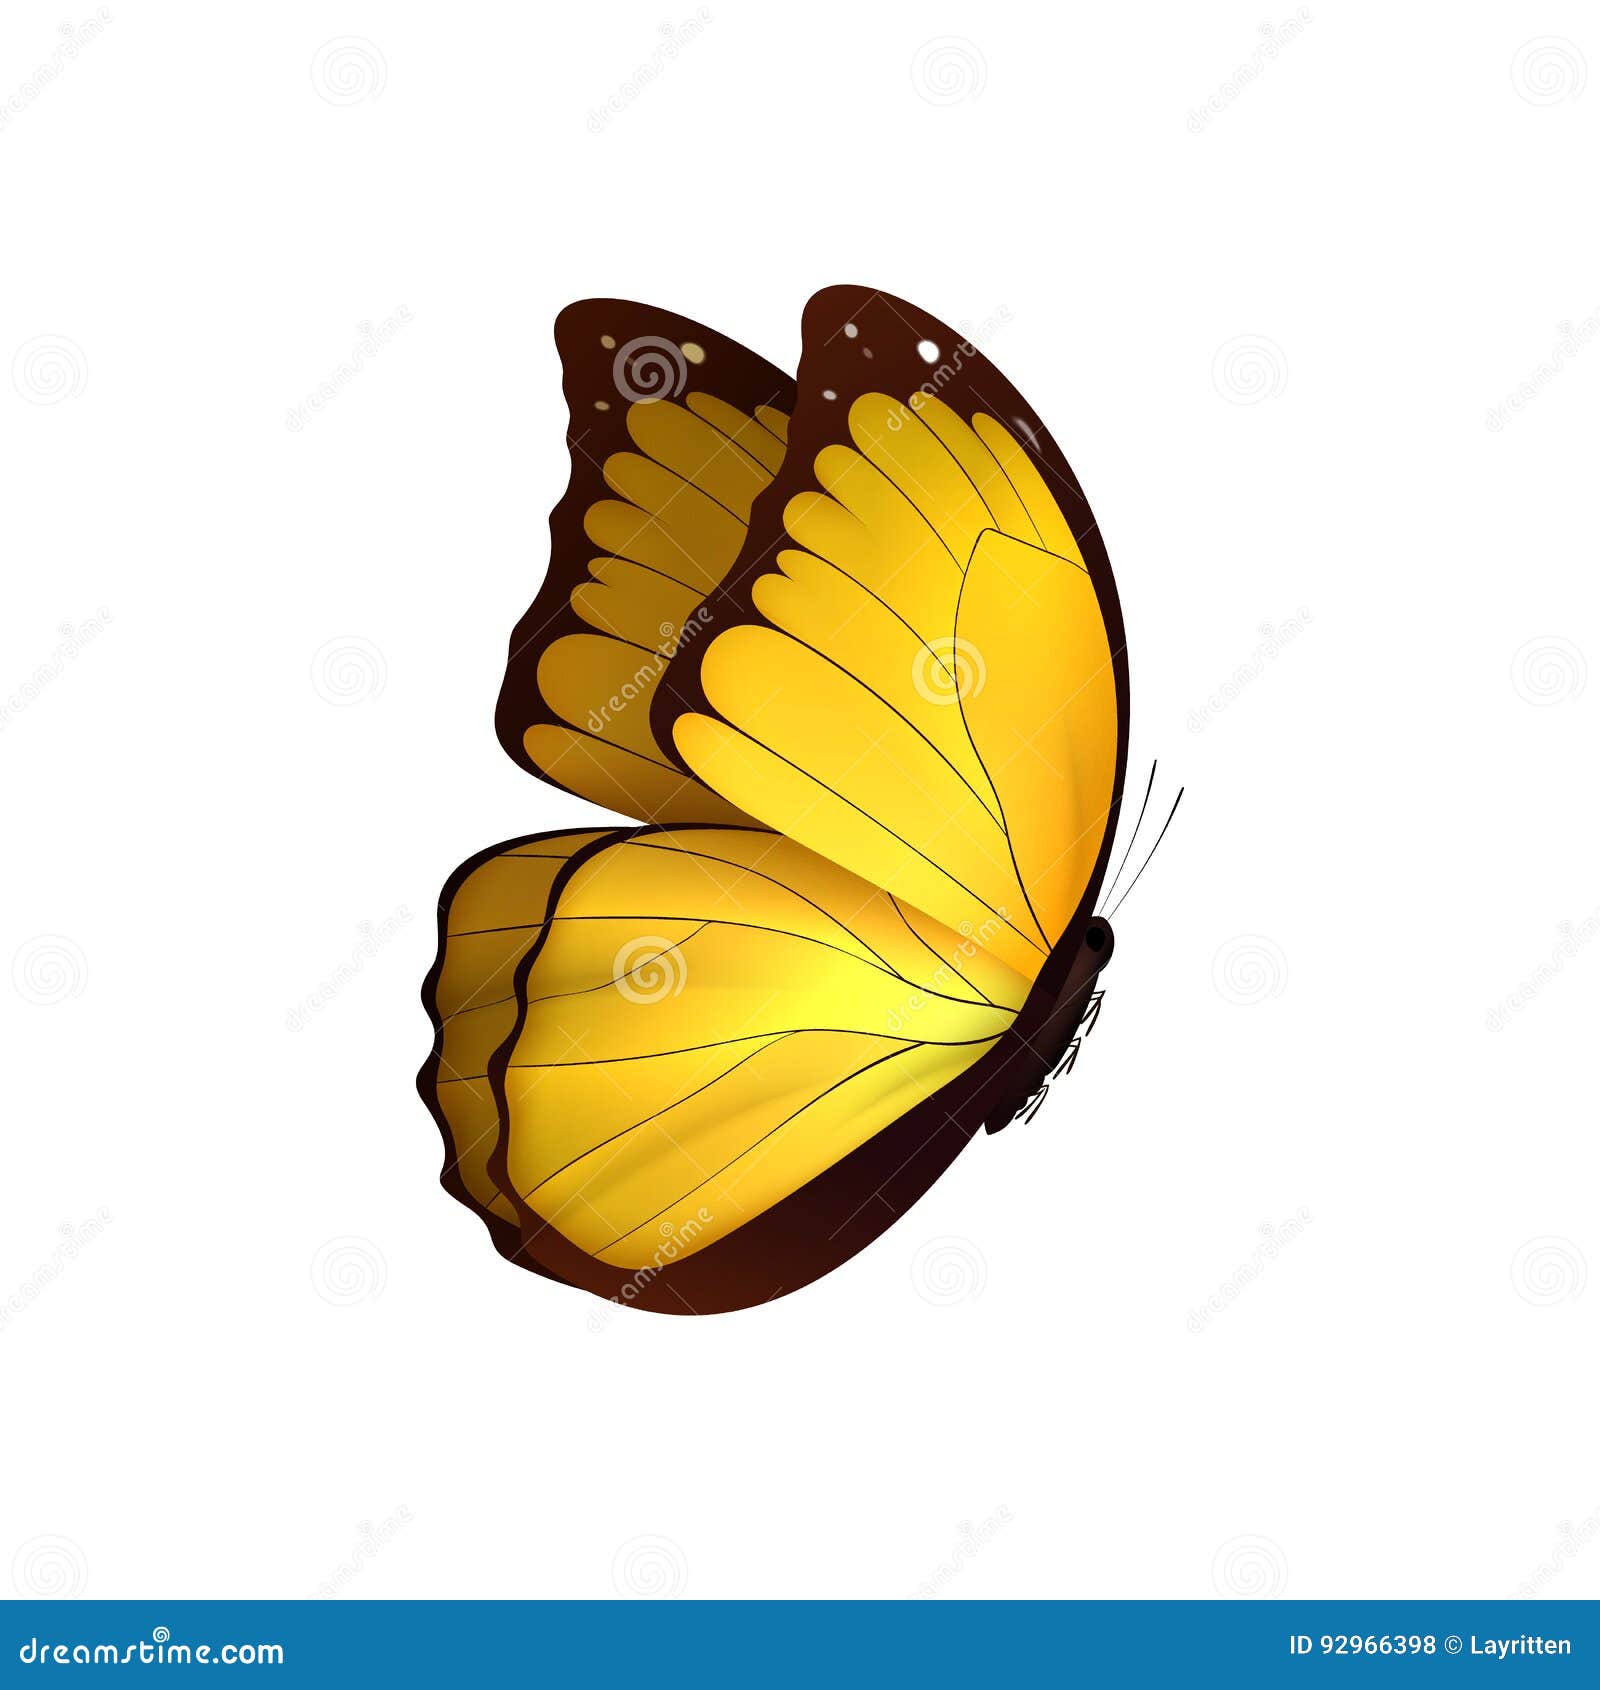 butterfly yellow  on white background. butterflies insects lepidoptera morpho amathonte.